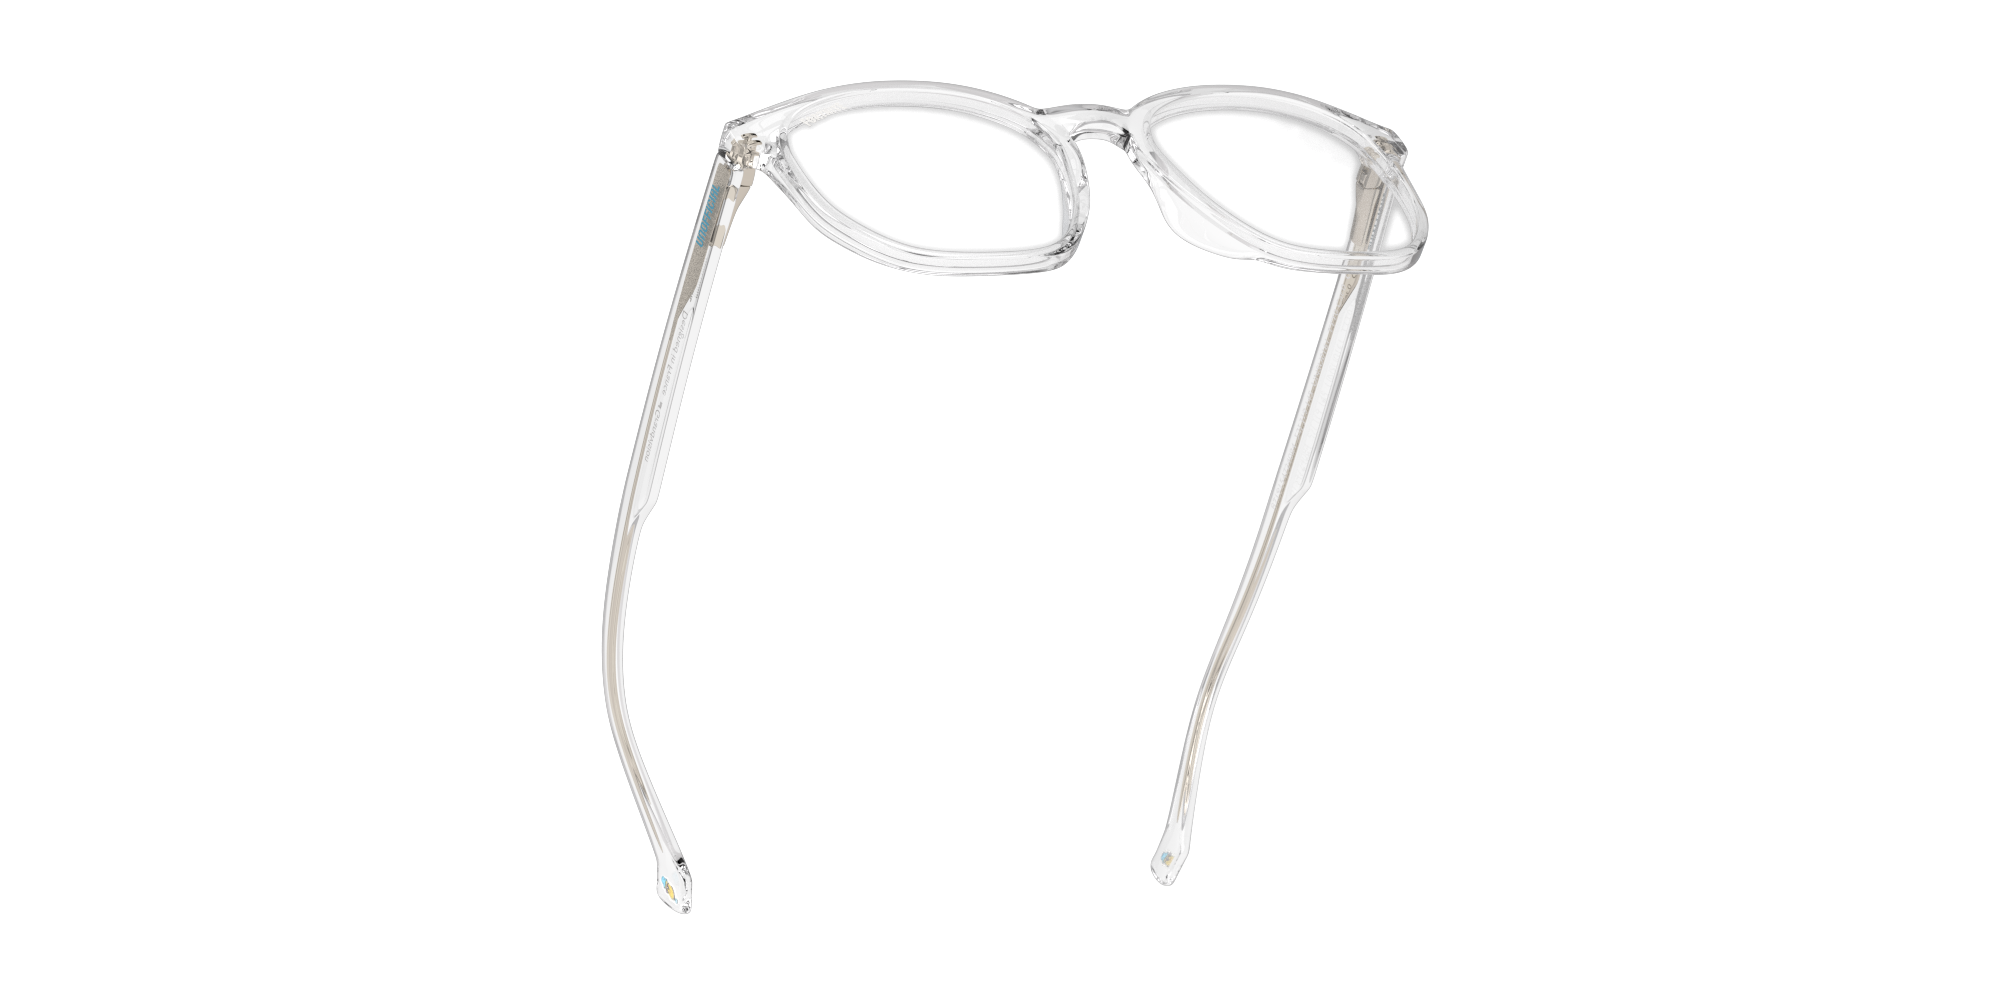 Bottom_Up Fortnite with Unofficial UNSU0161 Glasses Transparent / Transparent, Clear